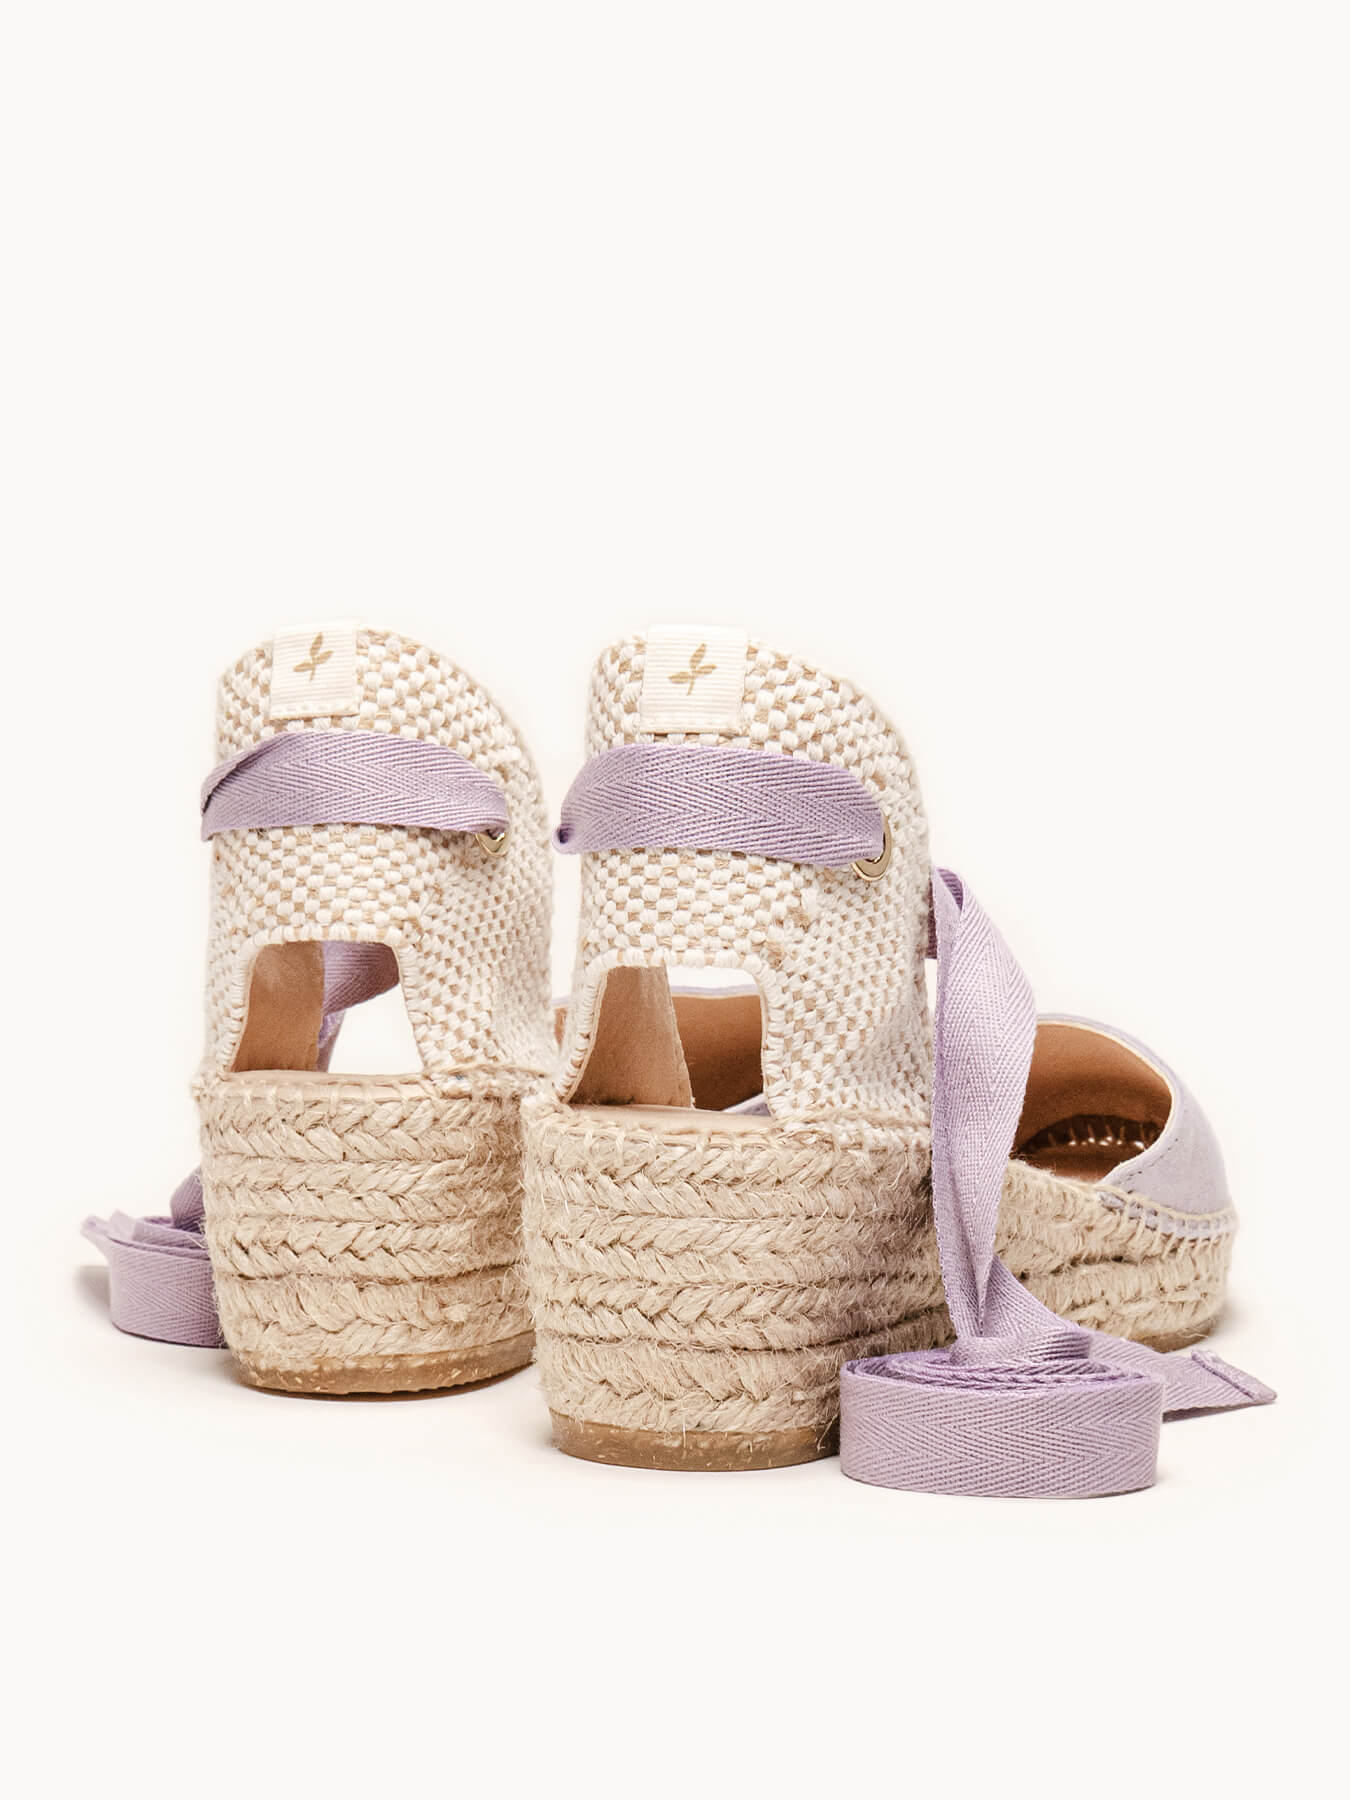 Romero Low Wedge Suede Lilac